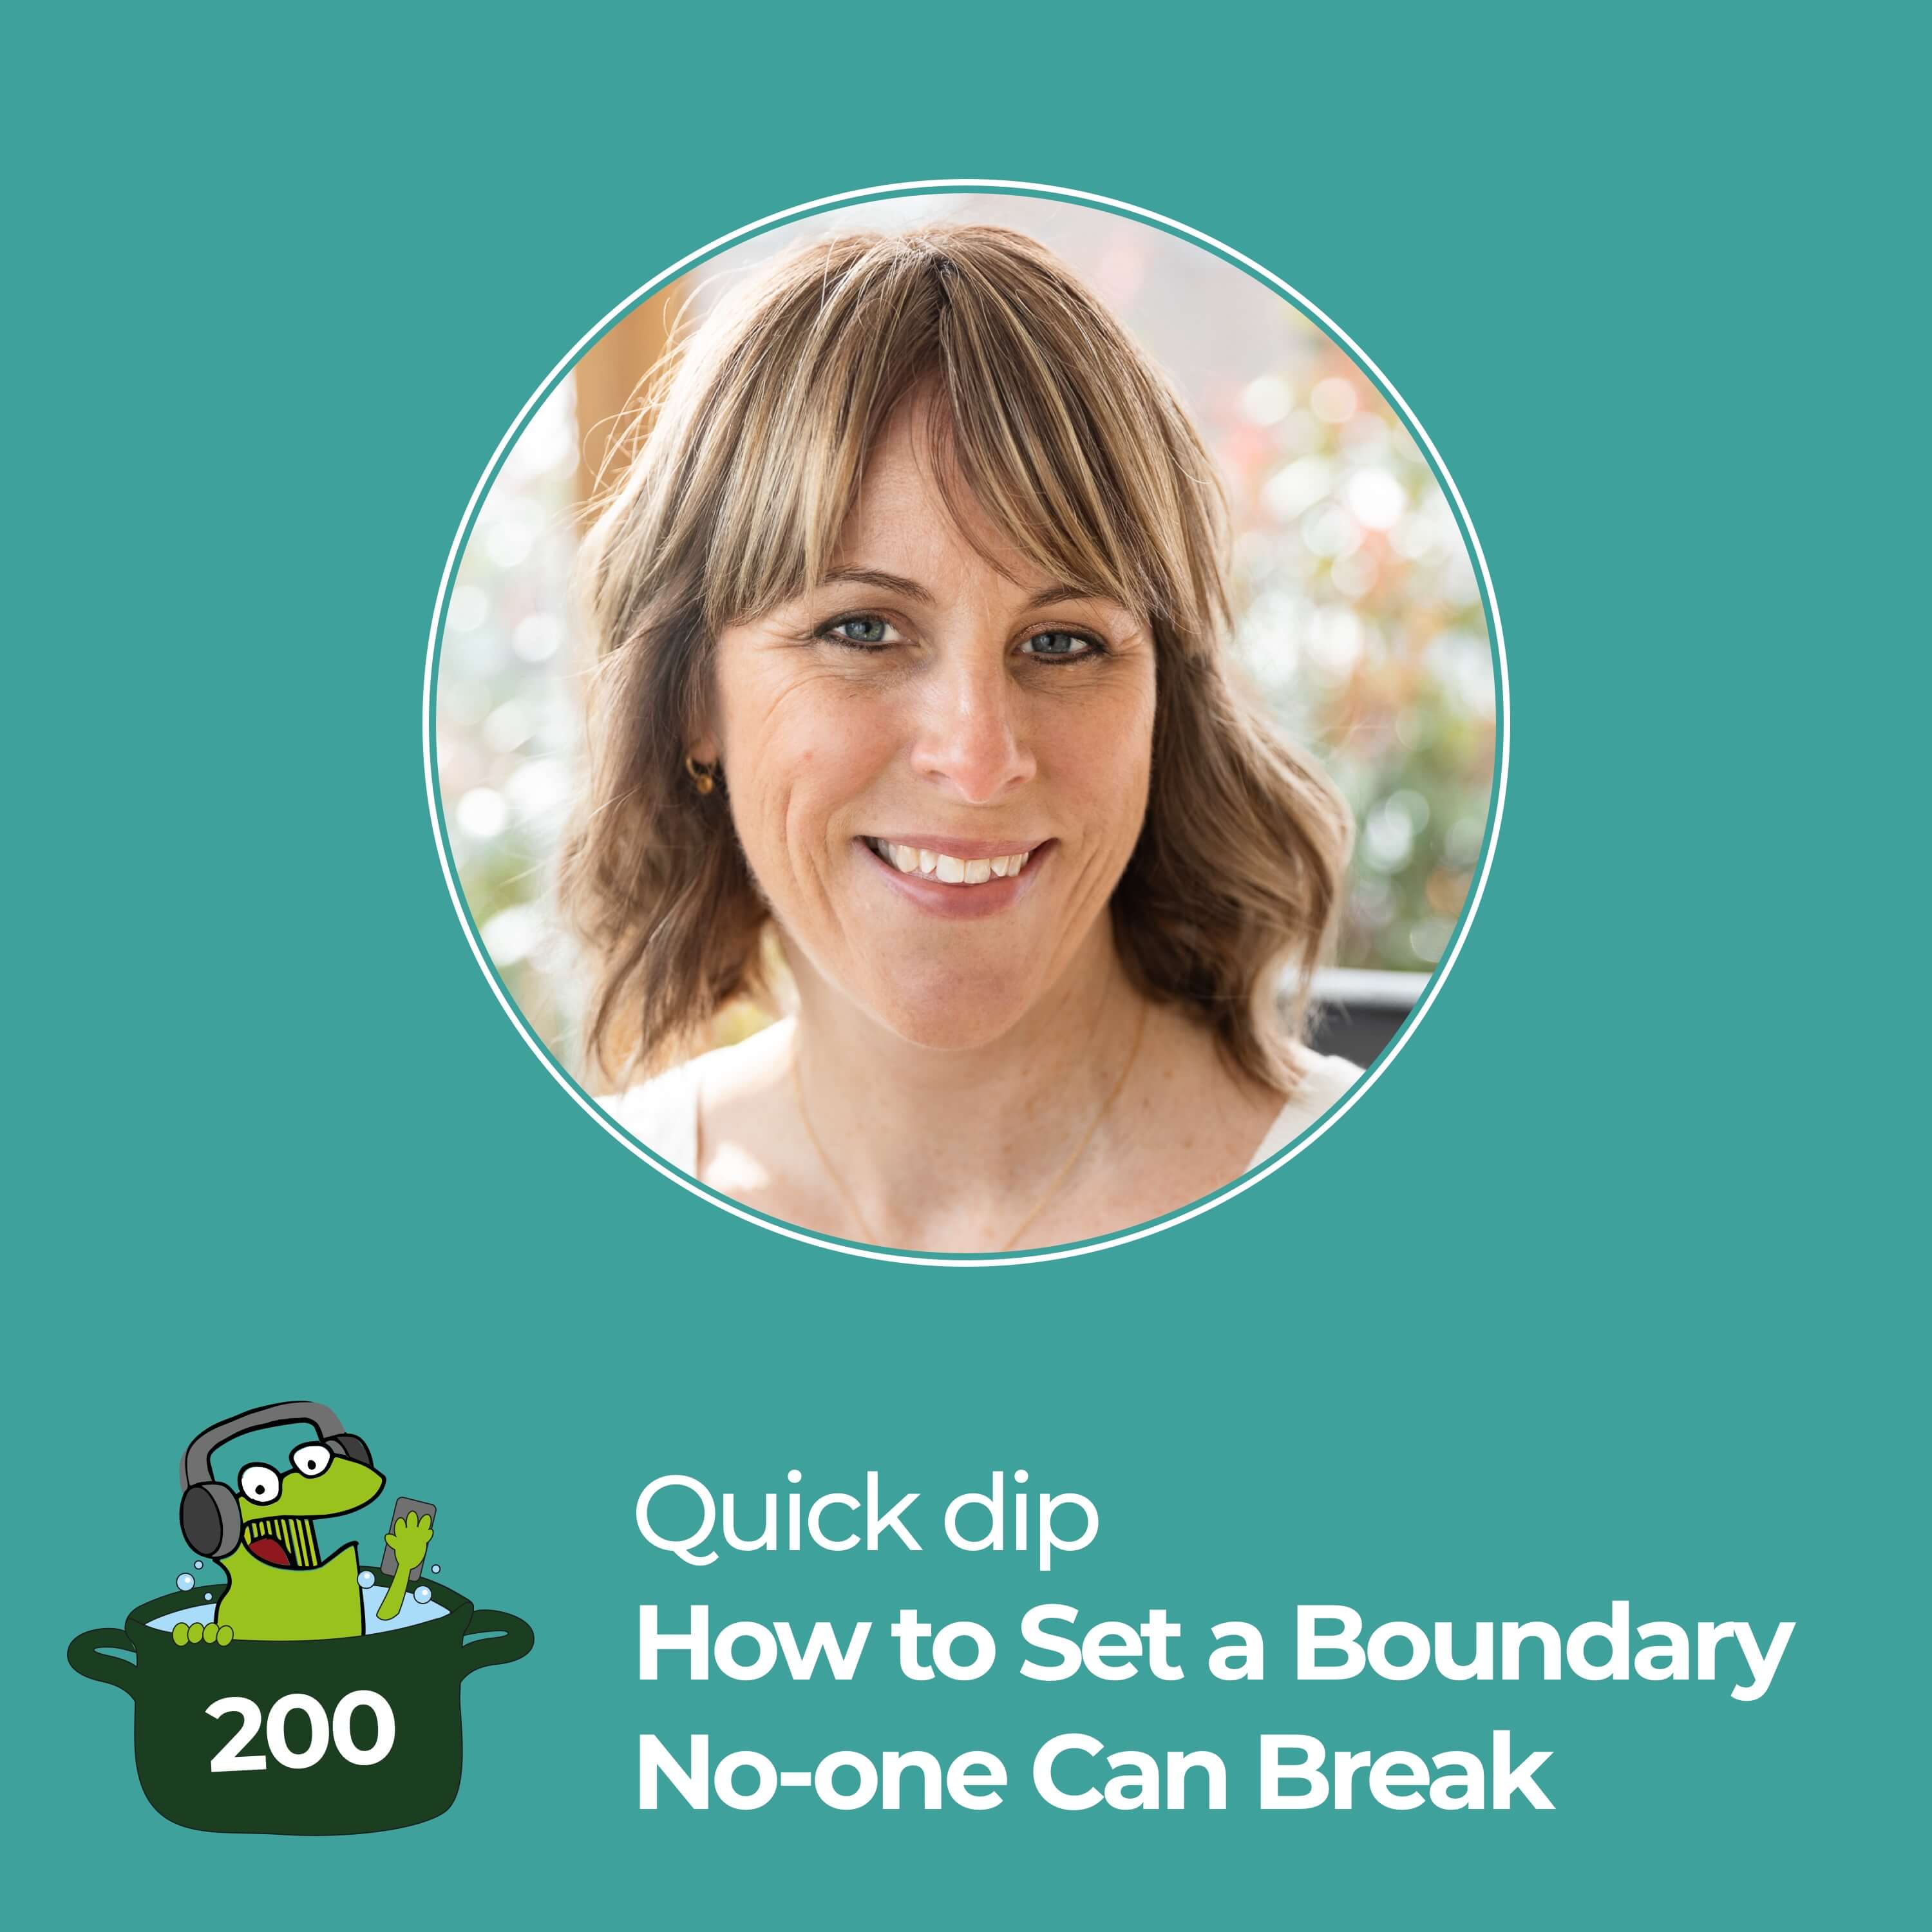 How to Set a Boundary No-one Can Break